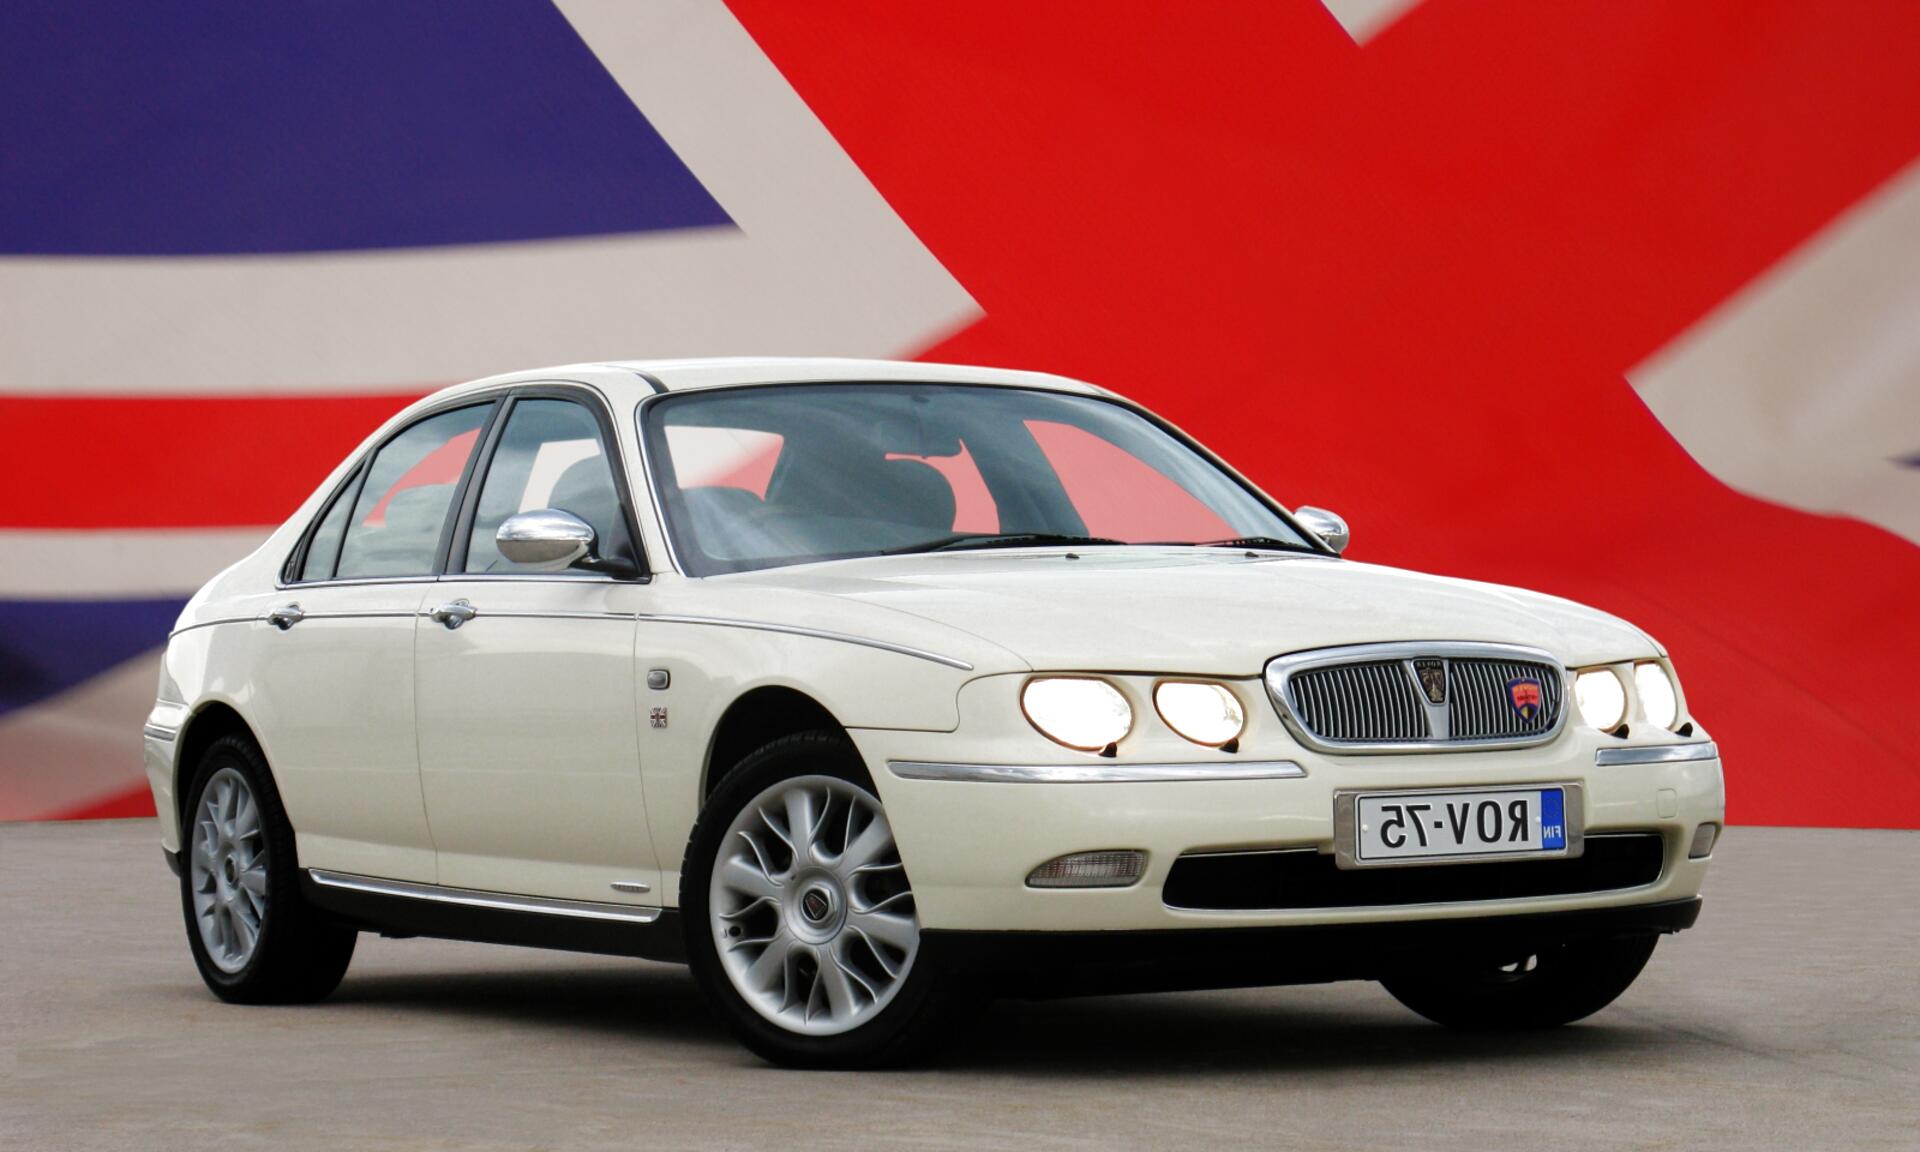 75 Rover 75 for sale in UK 79 secondhand 75 Rover 75